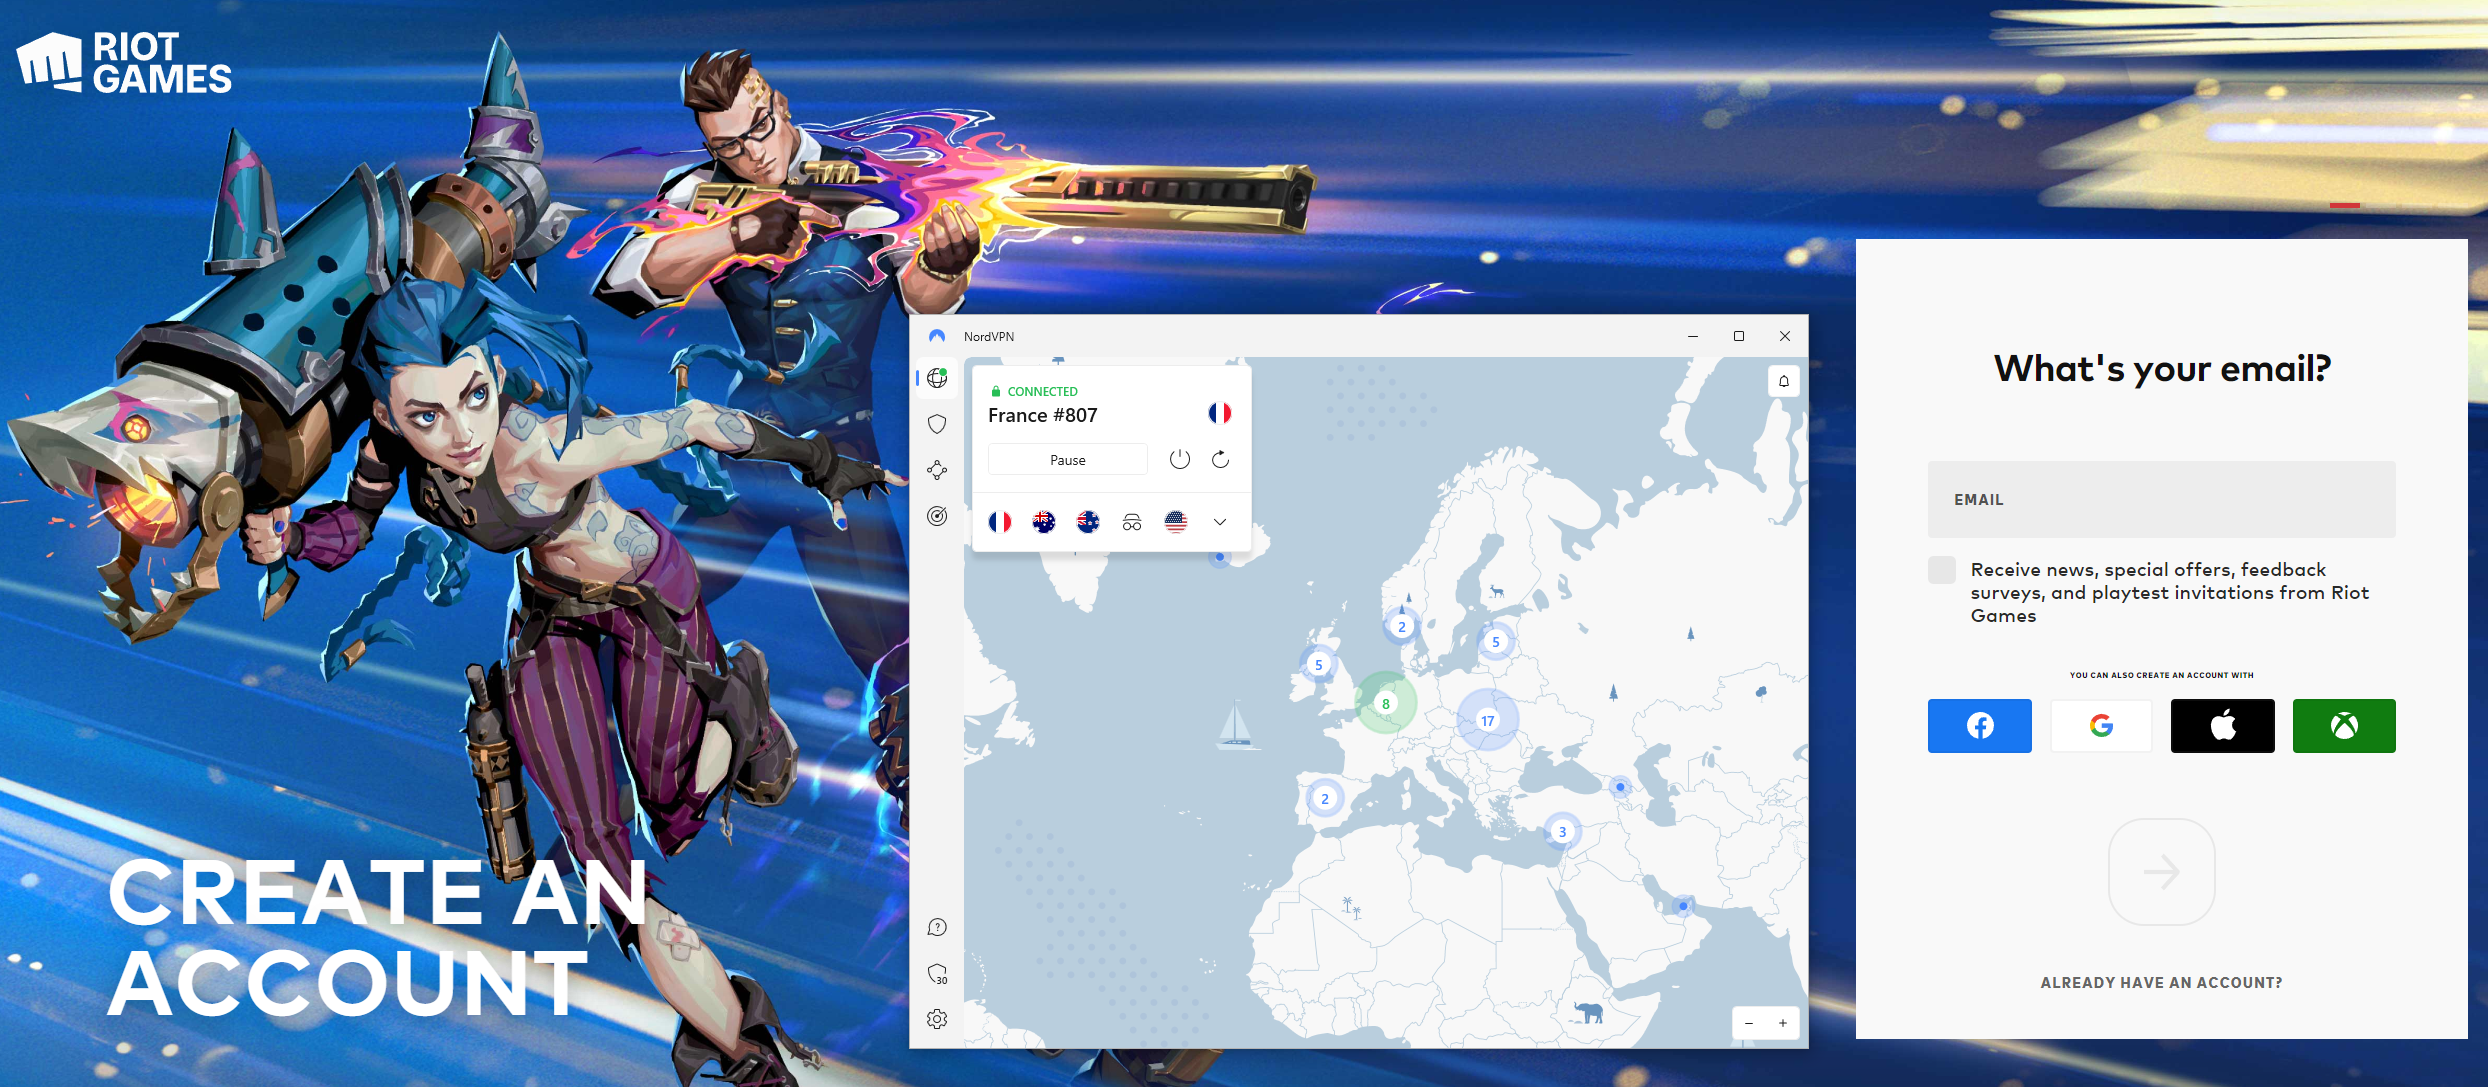 Create a new Riot Games account while connected to NordVPN